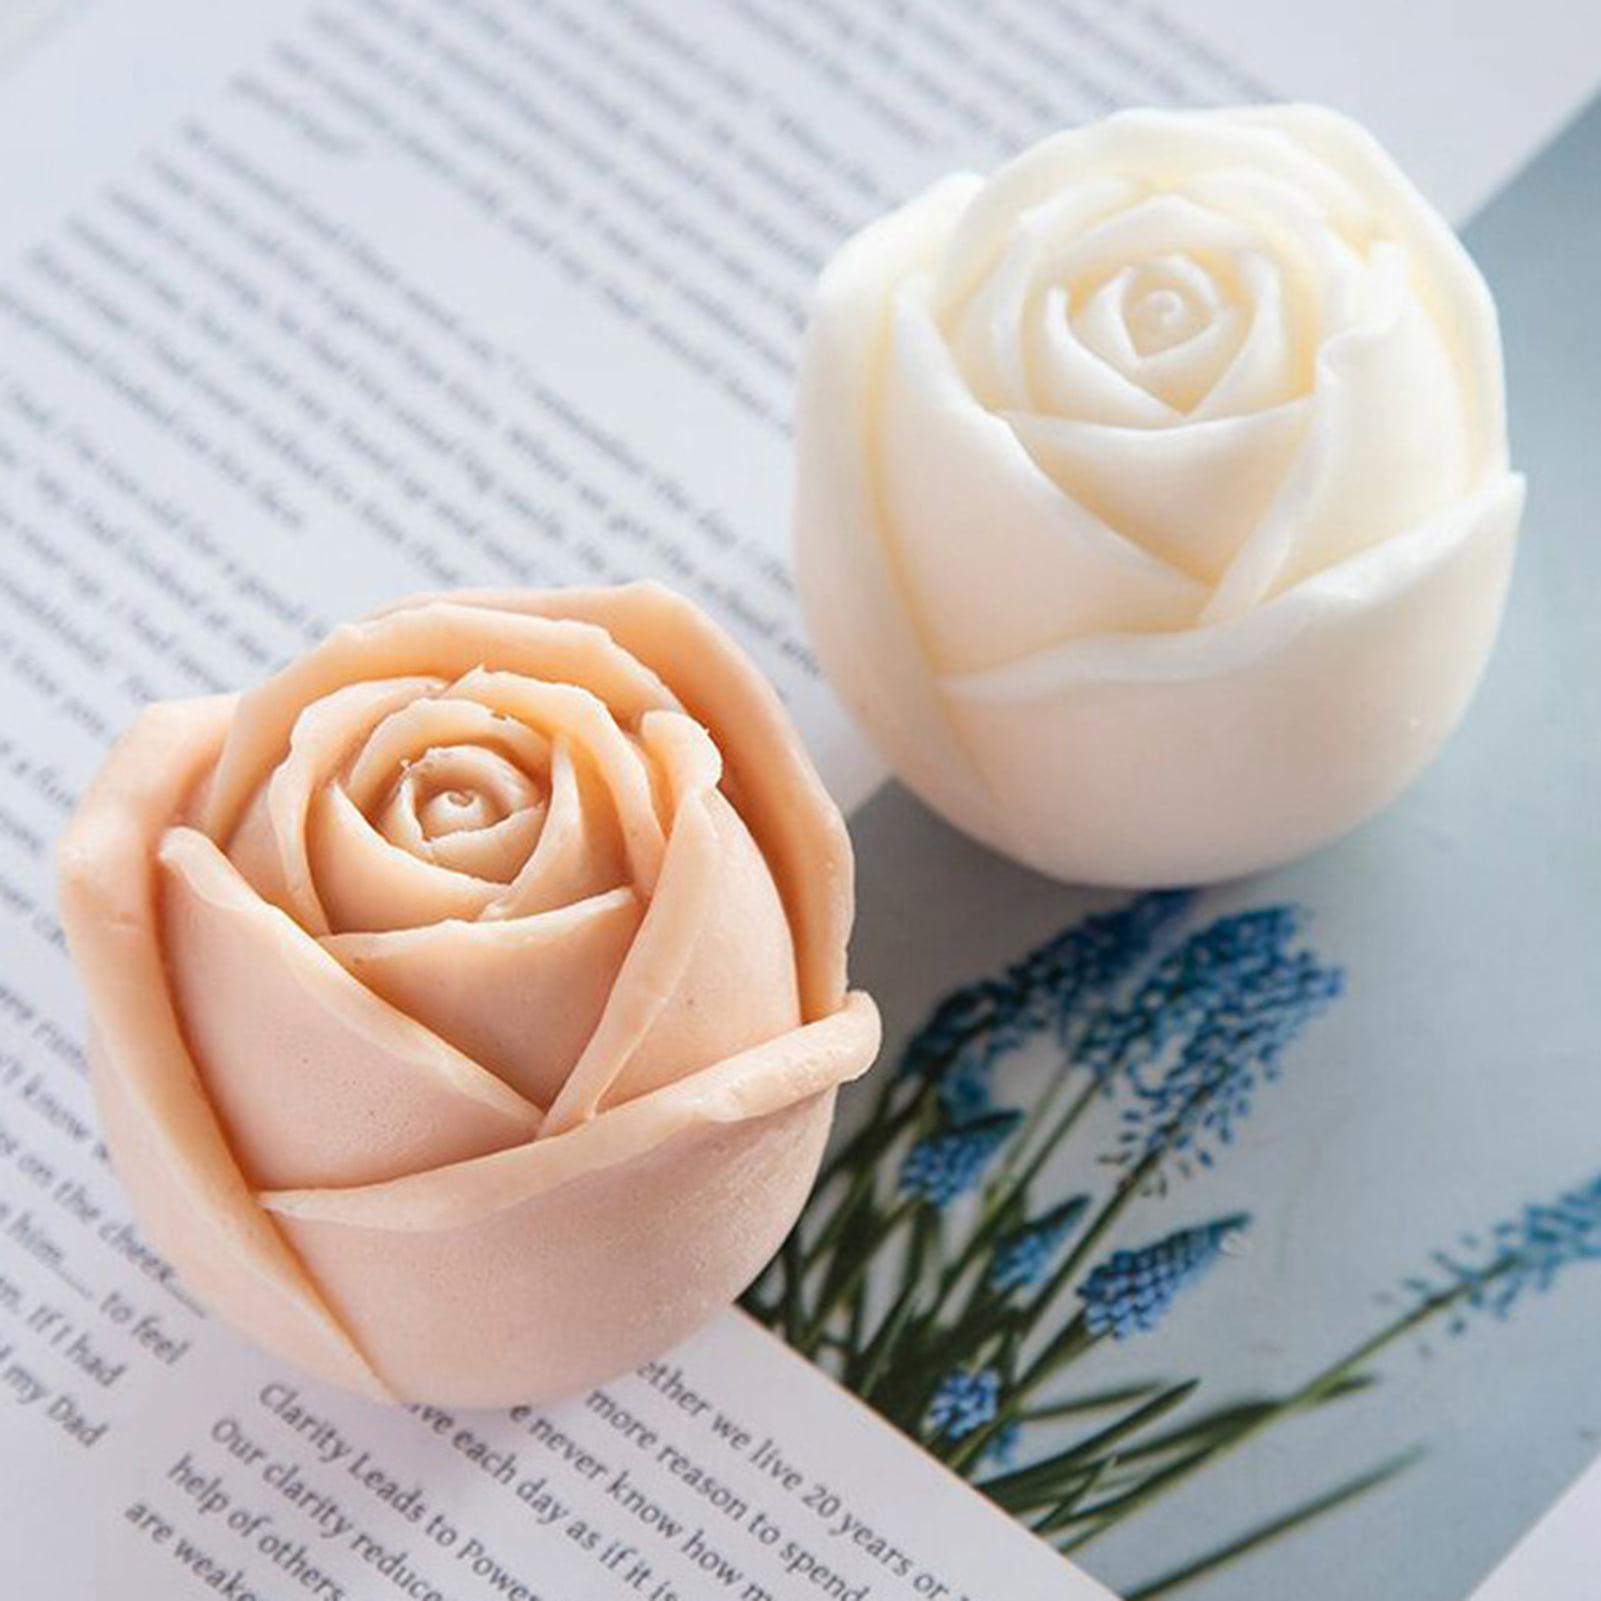 FUNBAKY Rose Flower Silicone Mold 6 Cavity Candy Chocolate Ice Cube Jelly  Cupcake Soap Cookie Mould